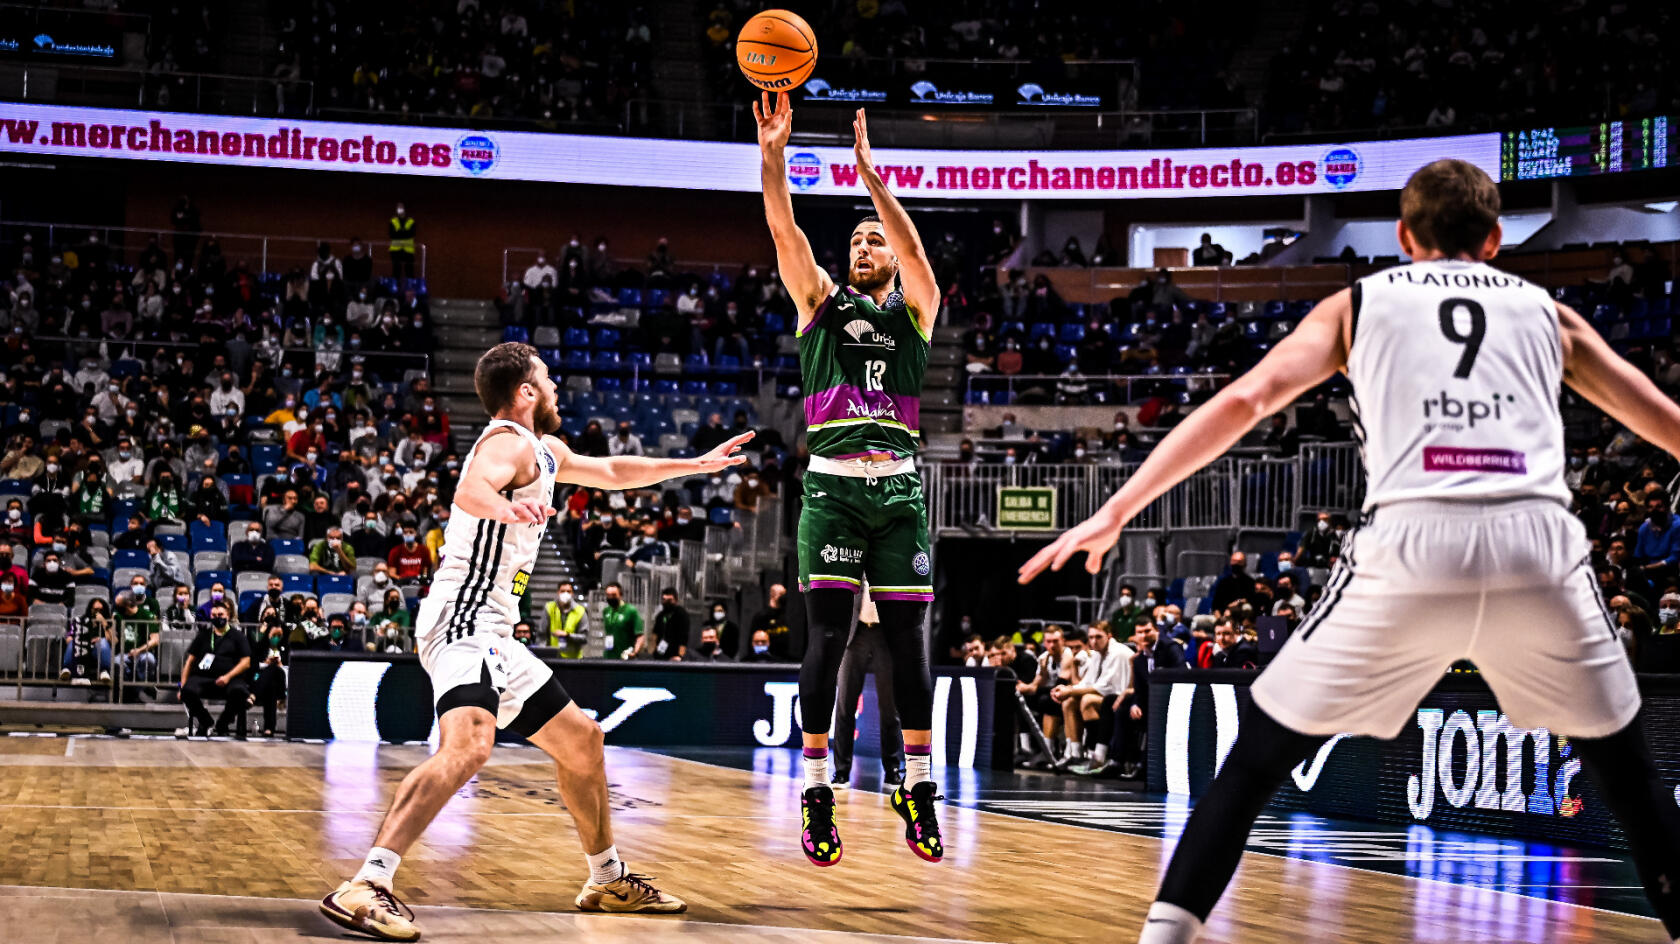 The BCL is shaping up for Unicaja ahead of the Round of 16